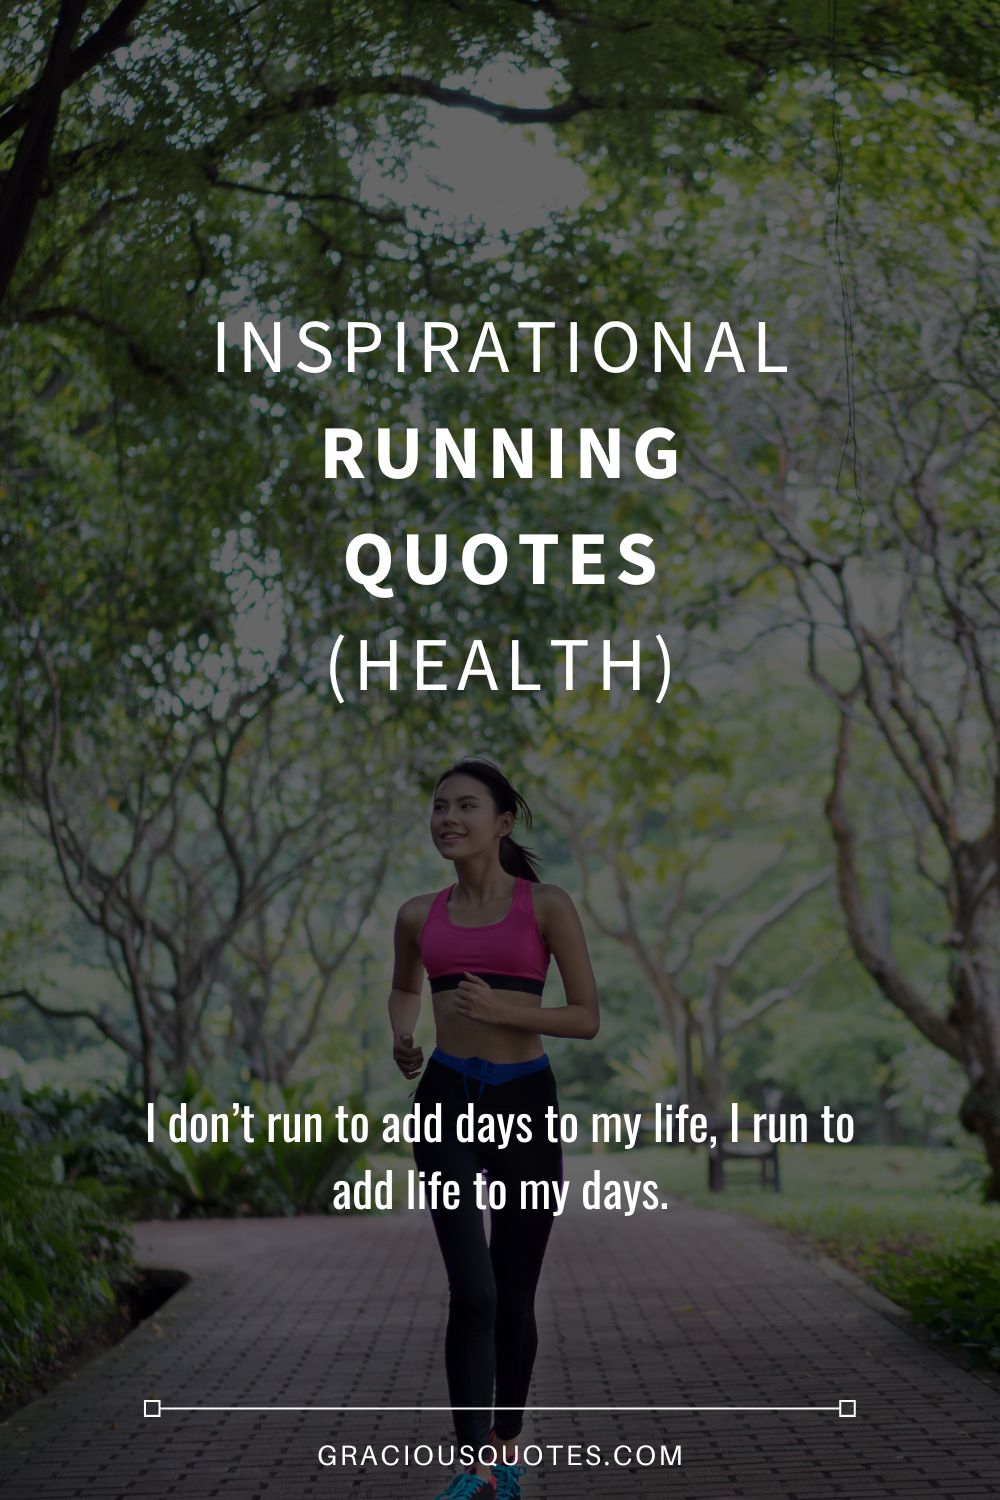 Inspirational Running Quotes (HEALTH) - Gracious Quotes